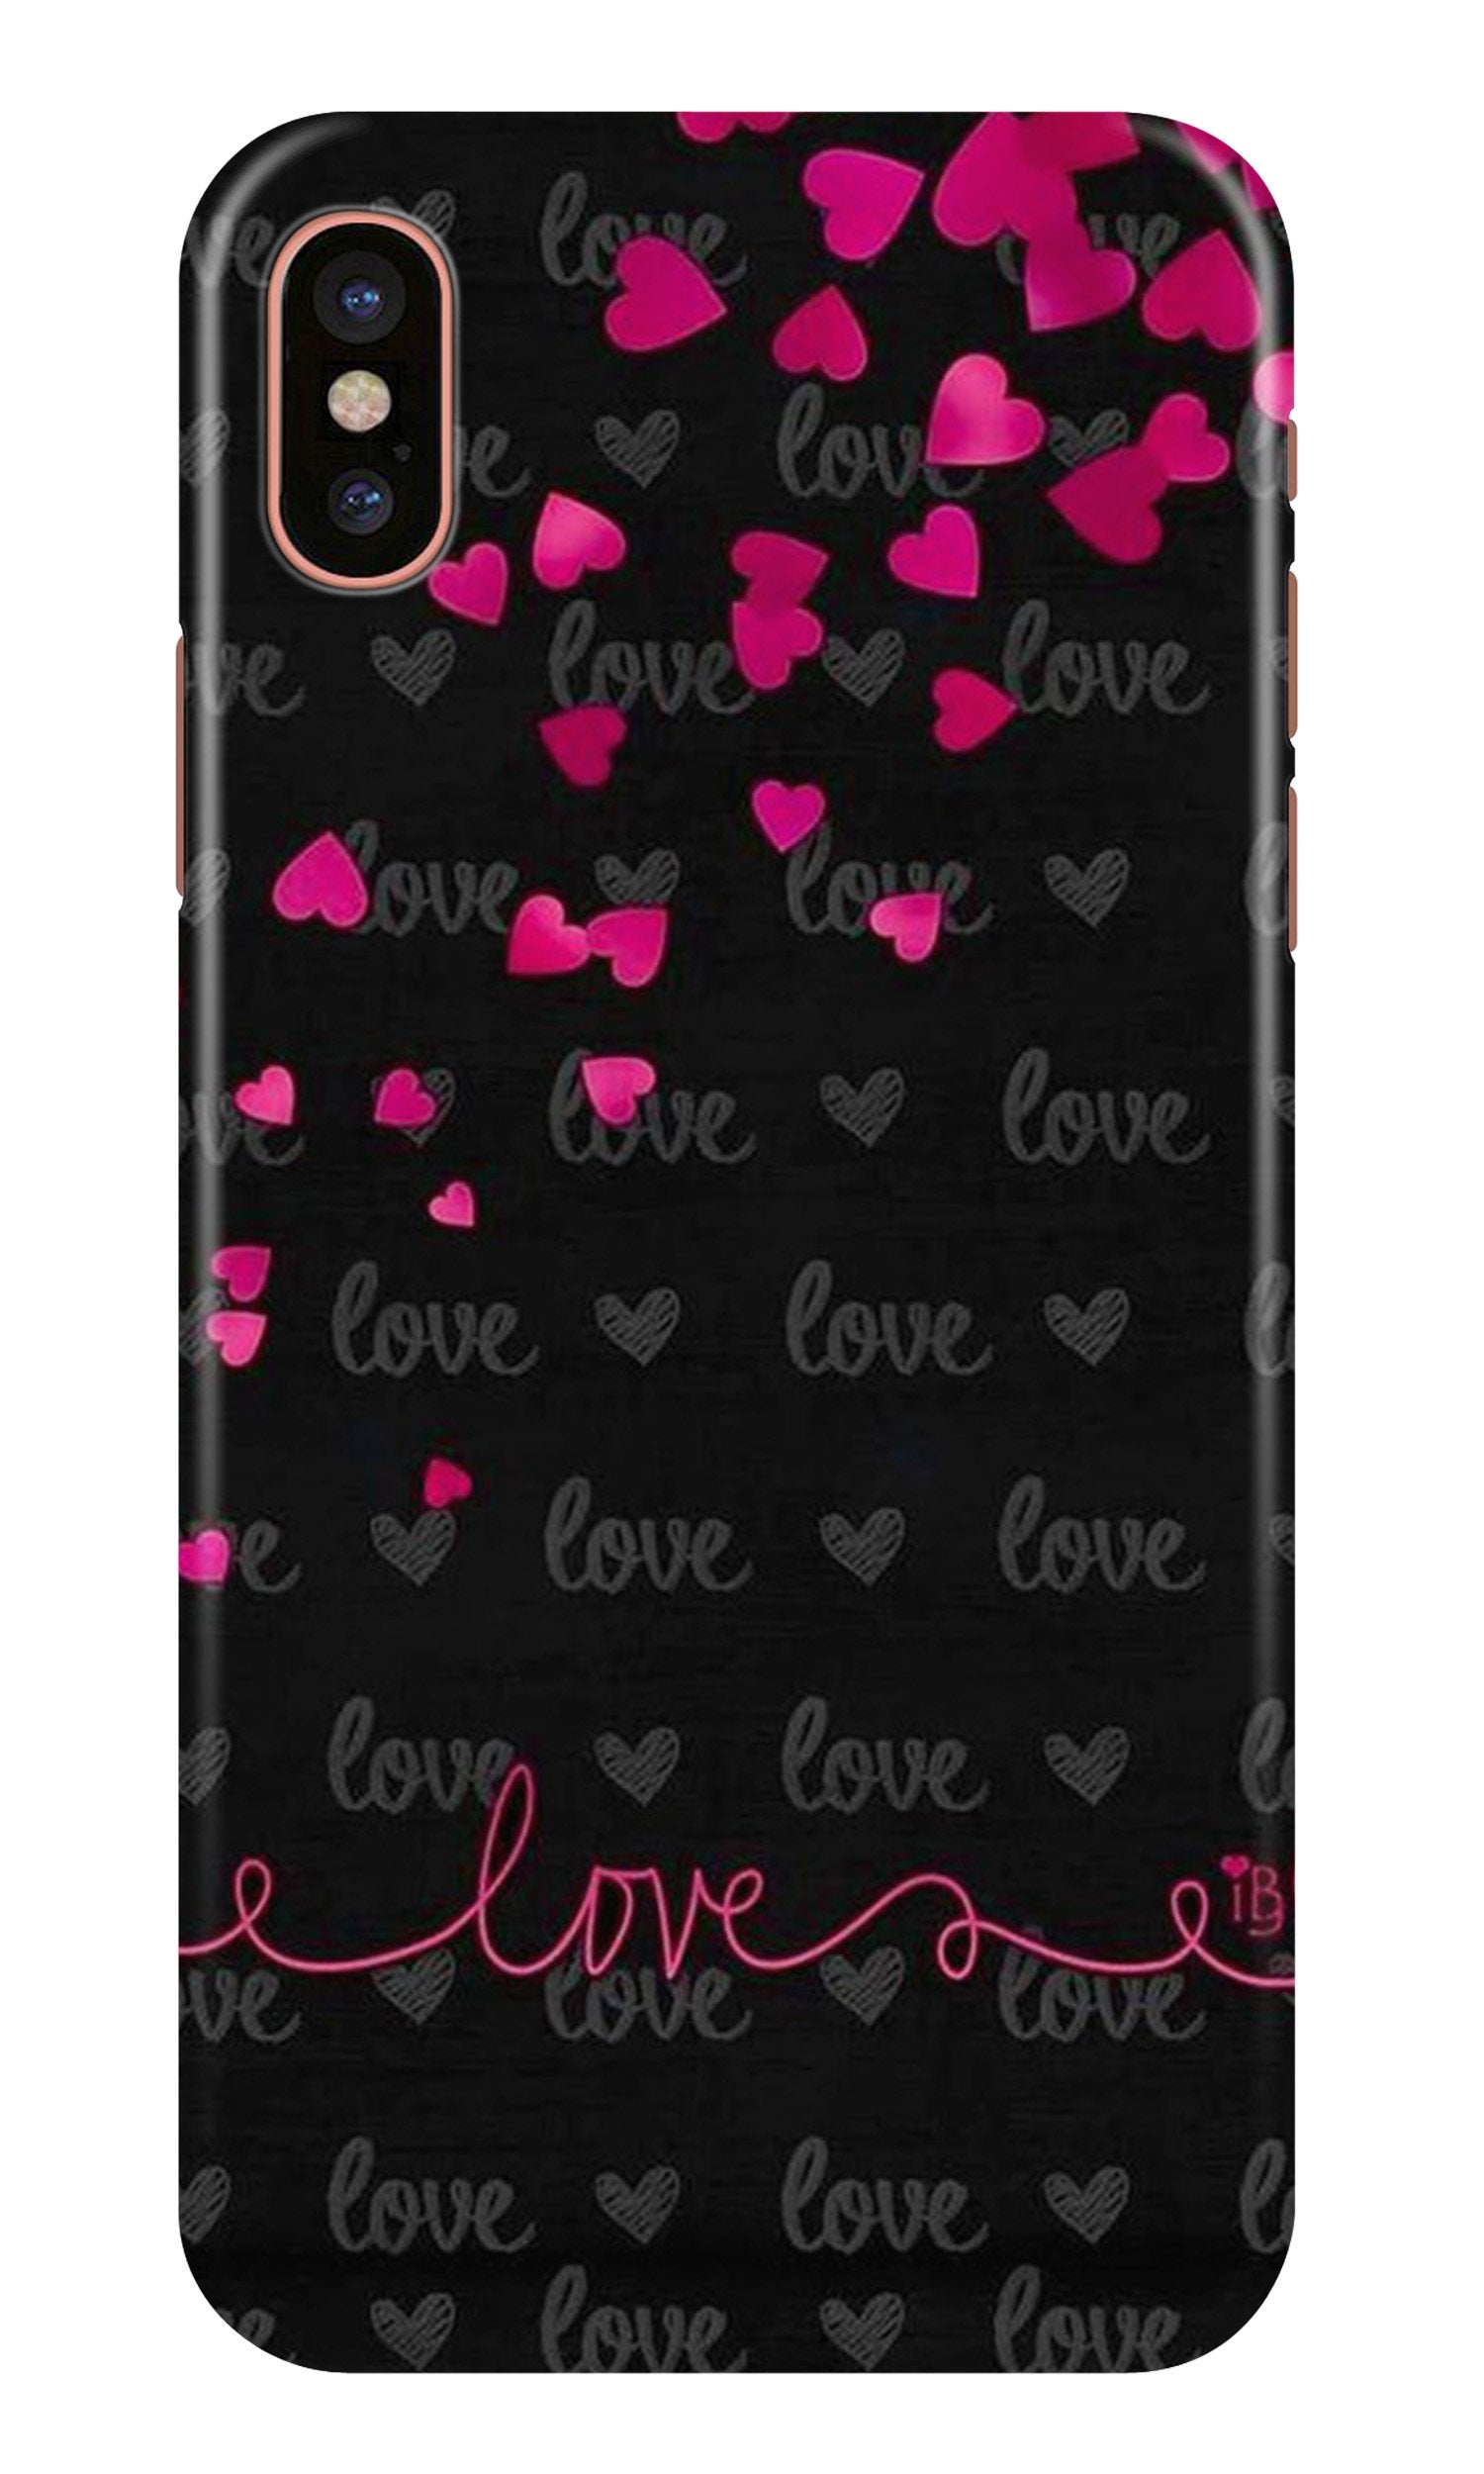 Love in Air Case for iPhone X